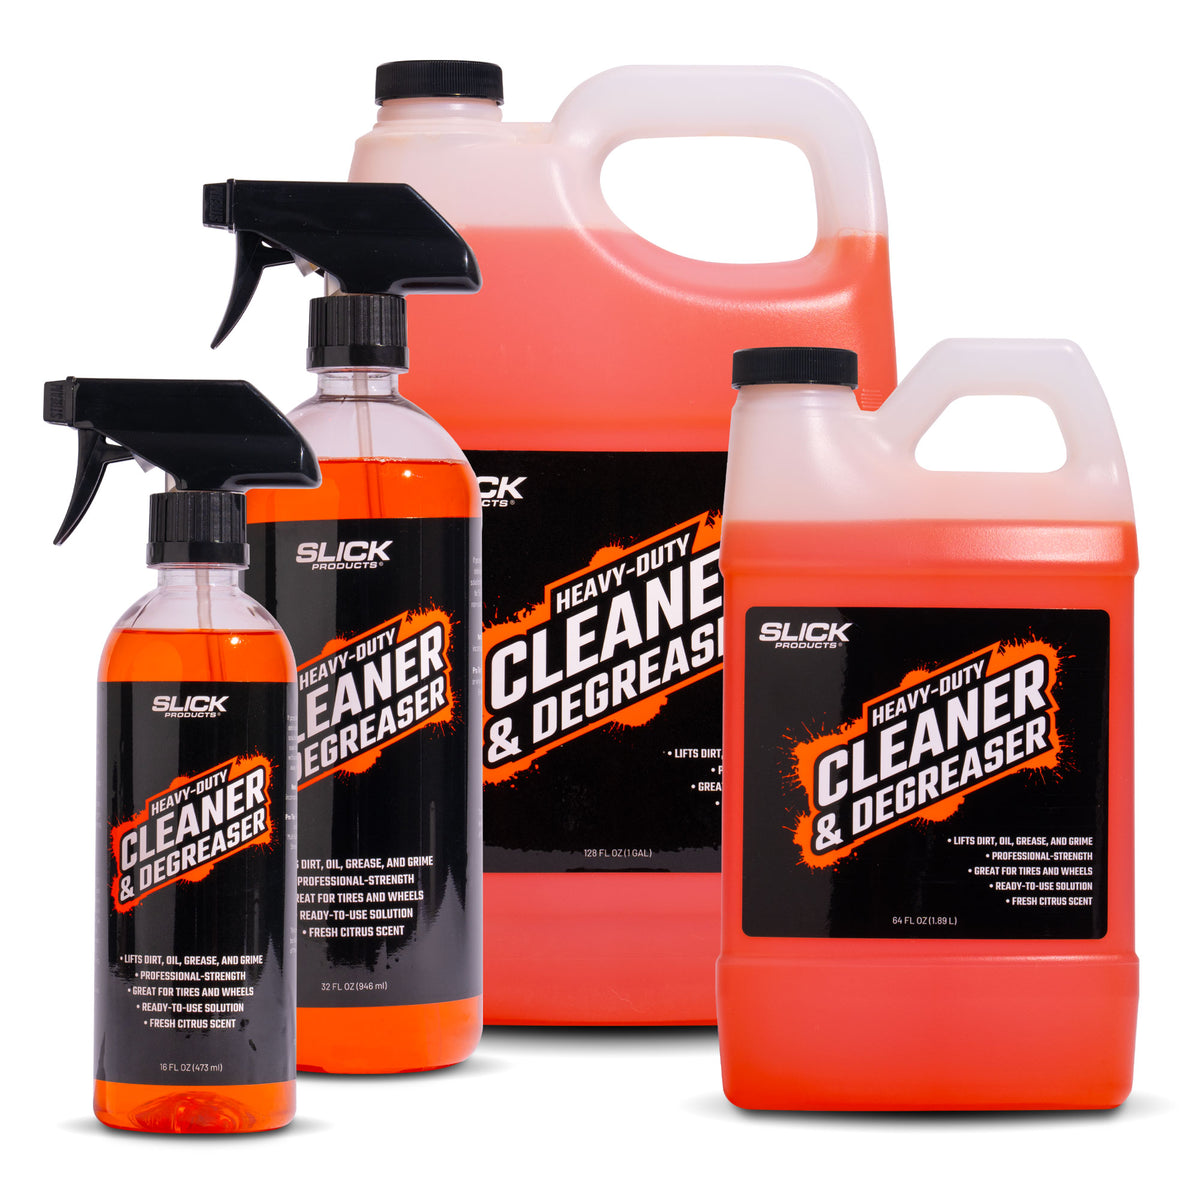 Degreaser Showdown: Which Product Tackles Grease and Grime Best?